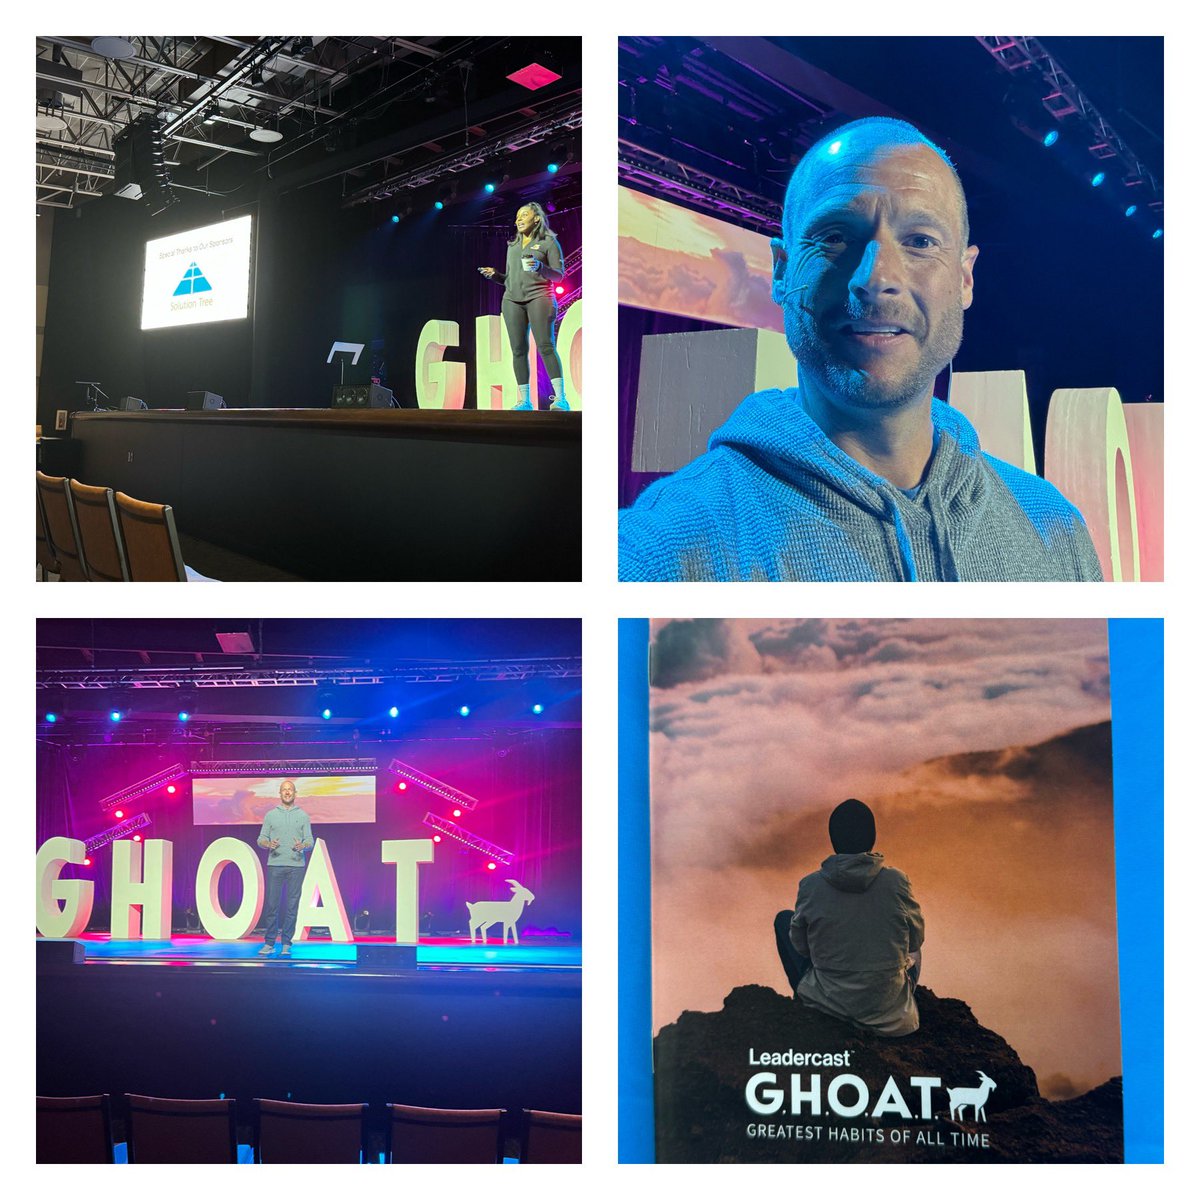 Day before walk-through for our @Leadercast 2024 flagship event G.H.O.A.T (Greatest Habits of All Time). Excited to hear from some amazing speakers tomorrow here in Dayton!